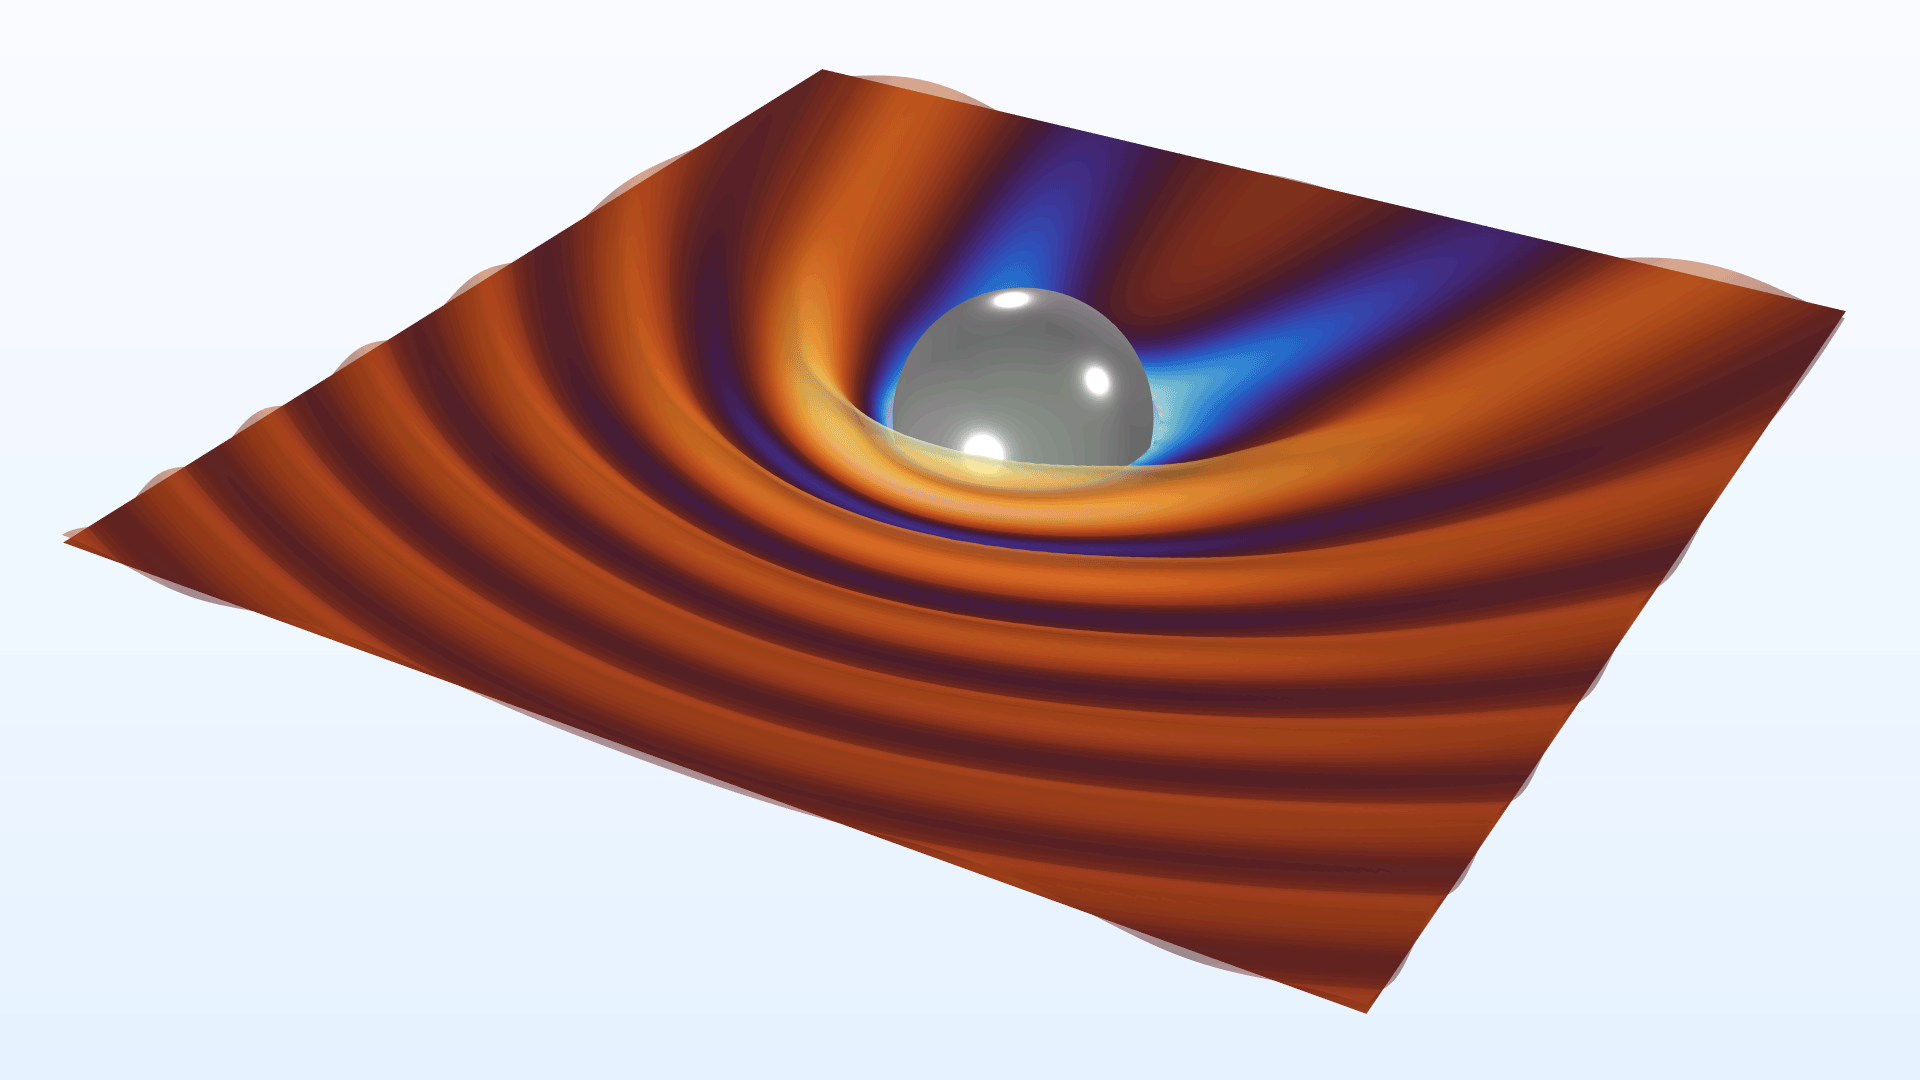 A metallic sphere model showing the electric field of a wave incident in the Thermal Wave color table.